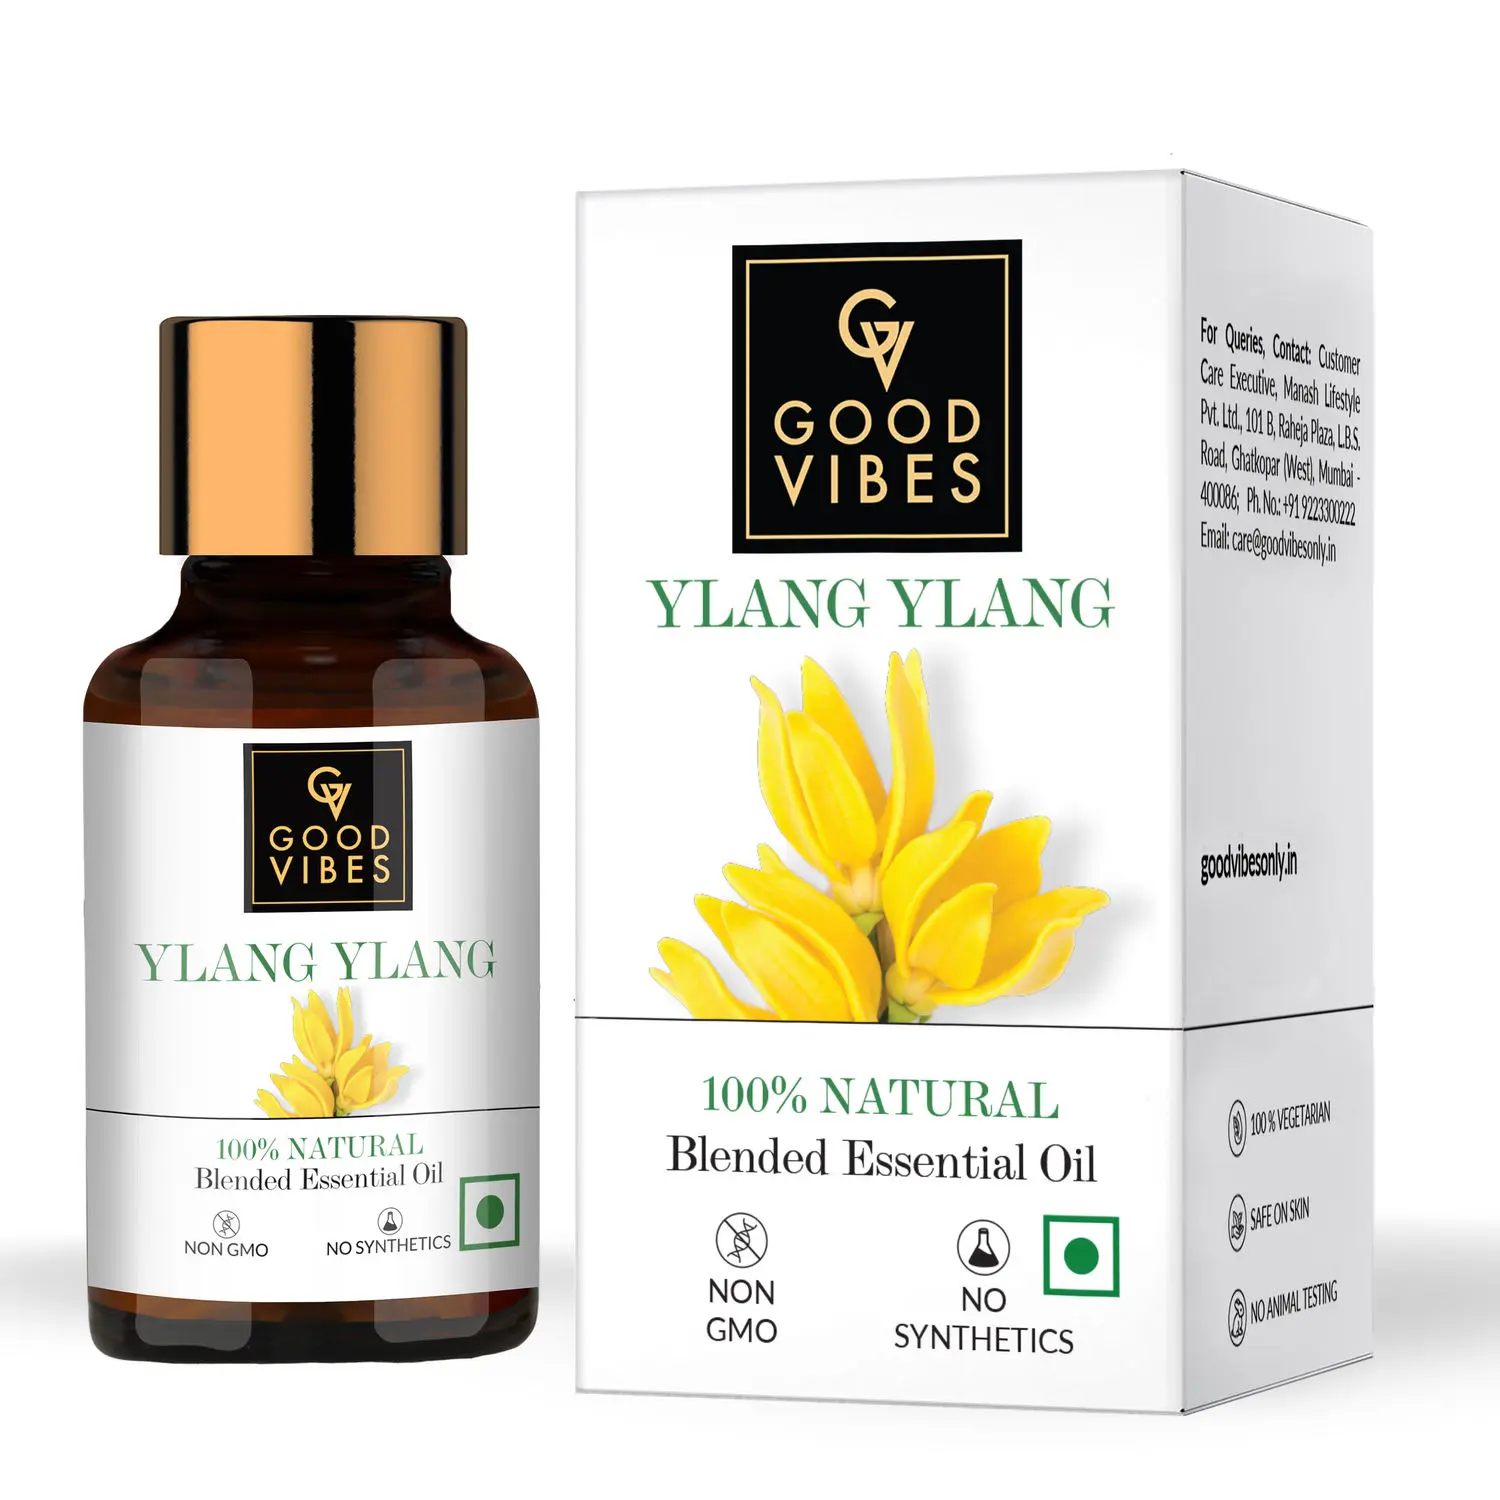 Good Vibes Ylang Ylang 100% Natural Blended Essential Oil (10 ml)